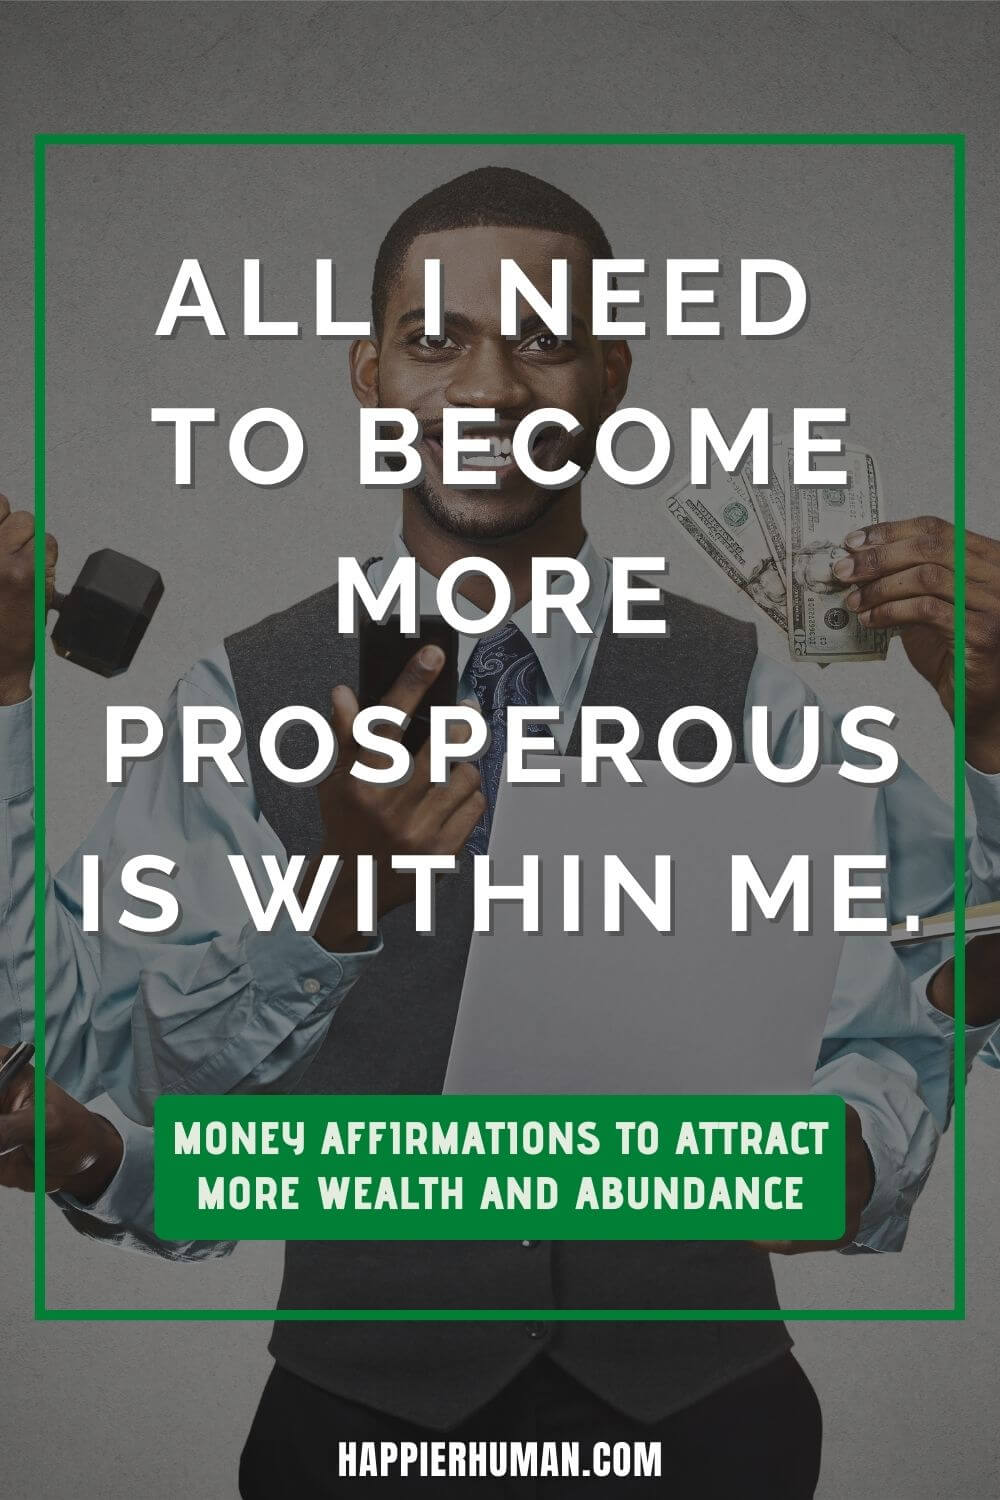 Money Affirmations - All I need to become more prosperous is within me. | 7 most powerful money affirmations | list of money affirmations | 111 money affirmations